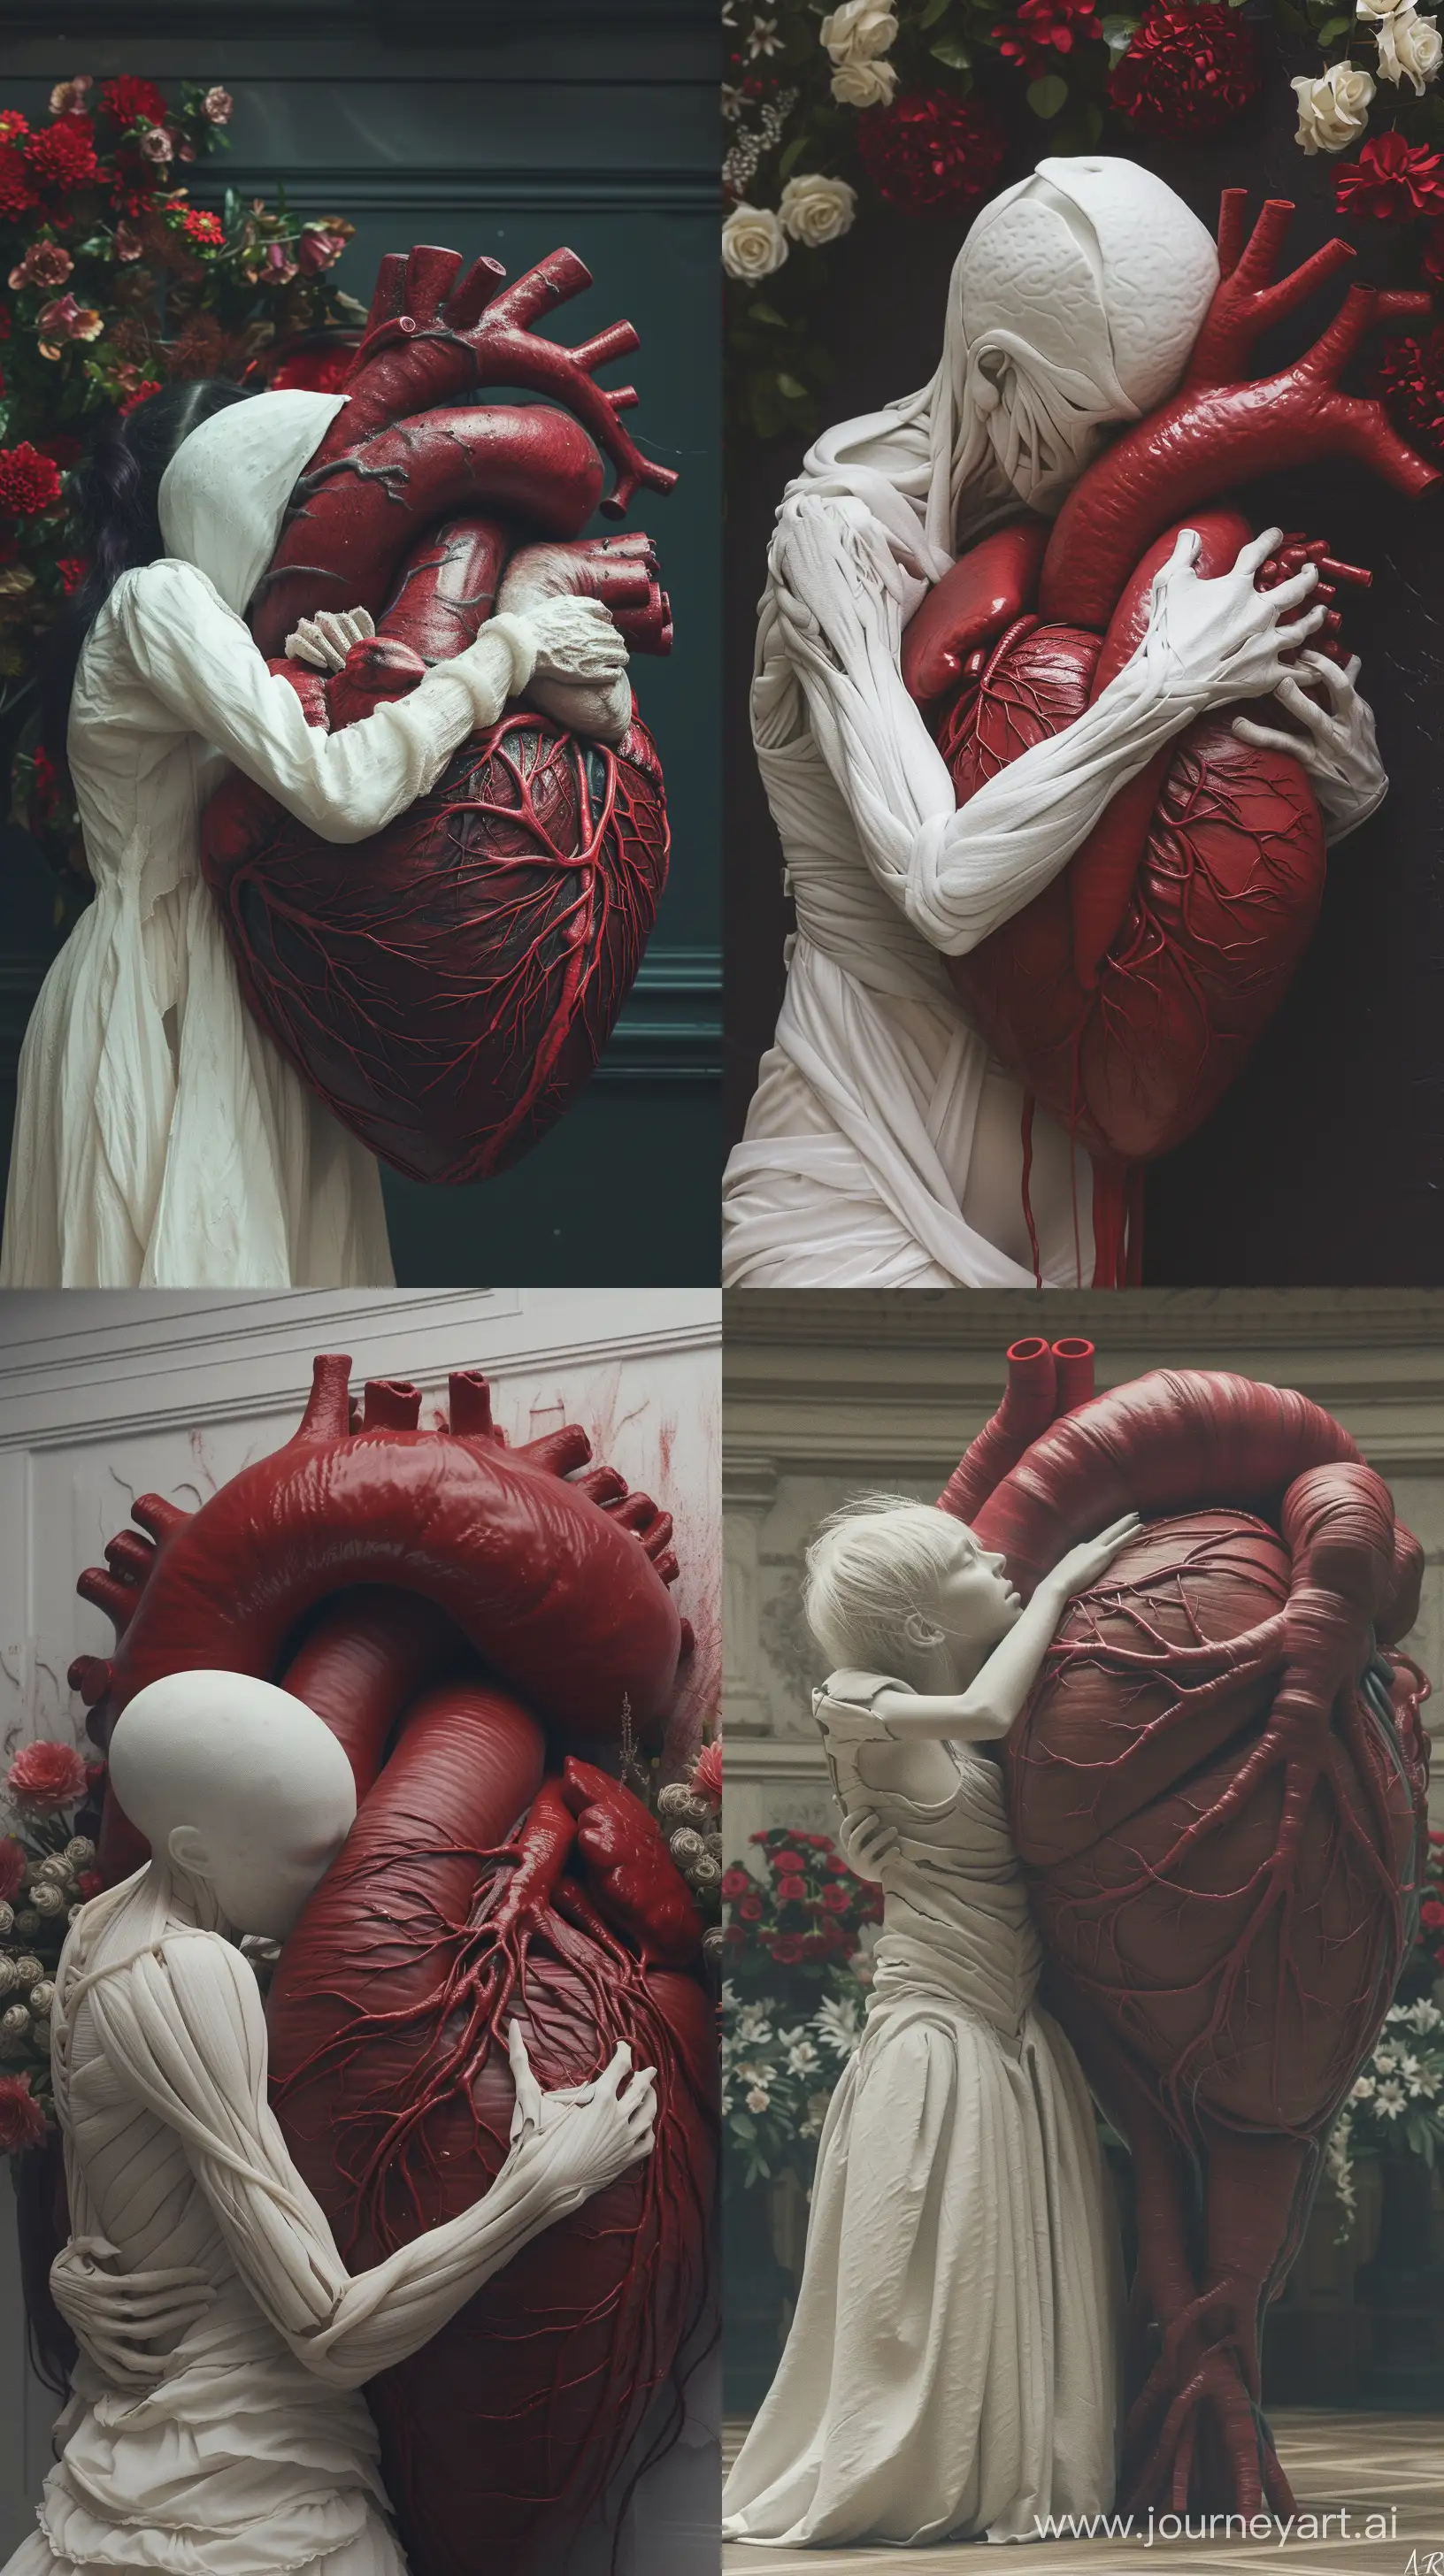 Embrace-of-Love-Faceless-Woman-Hugging-Giant-Heart-in-Marco-Mazzoni-Style